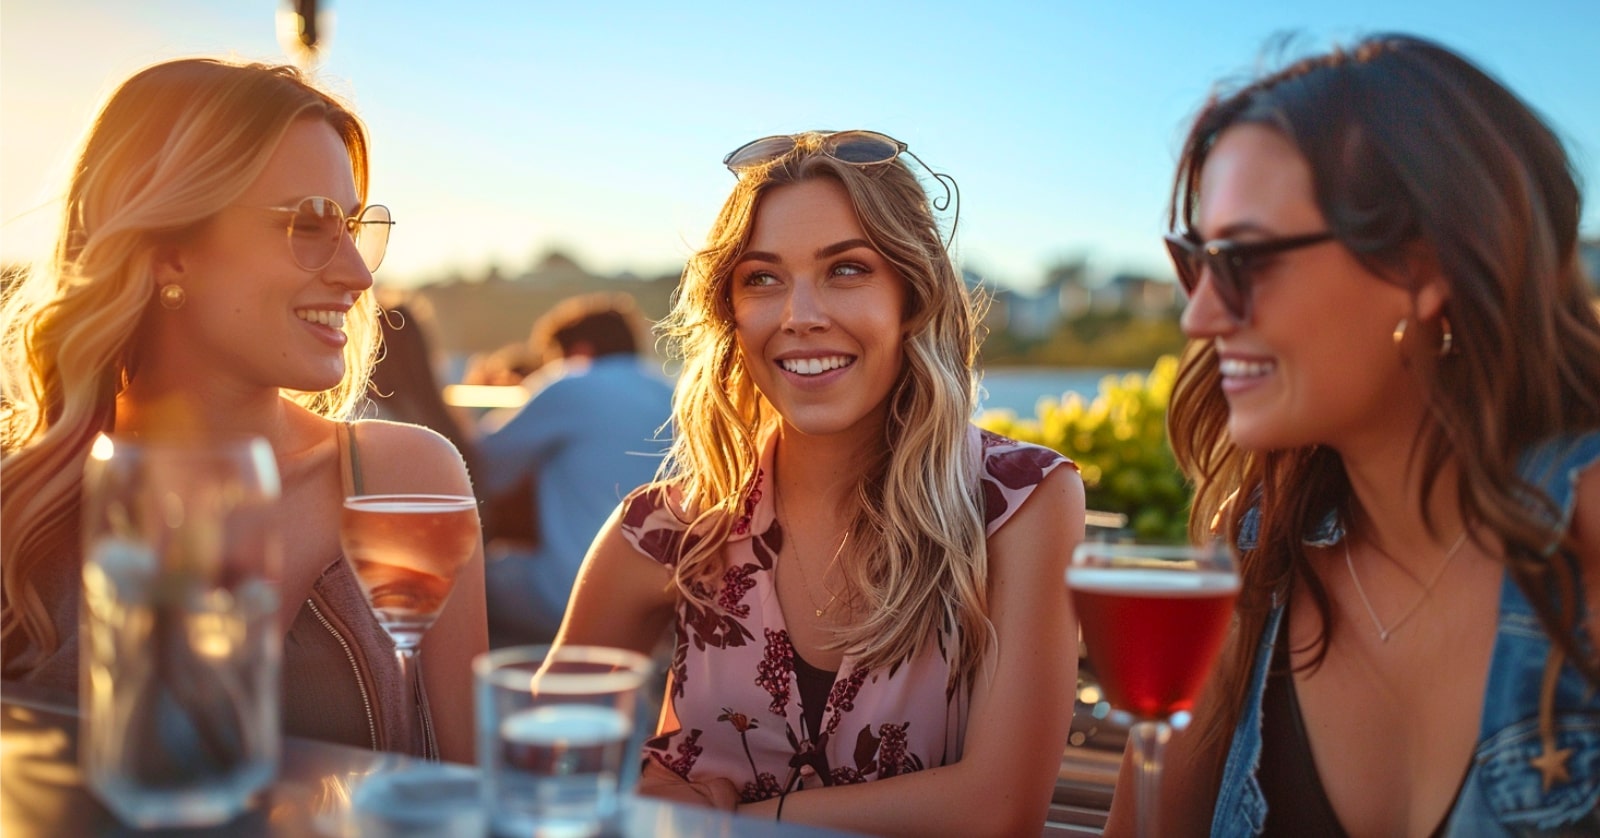 three young women smiling and drinking at a rooftop bar with blue skies and sun